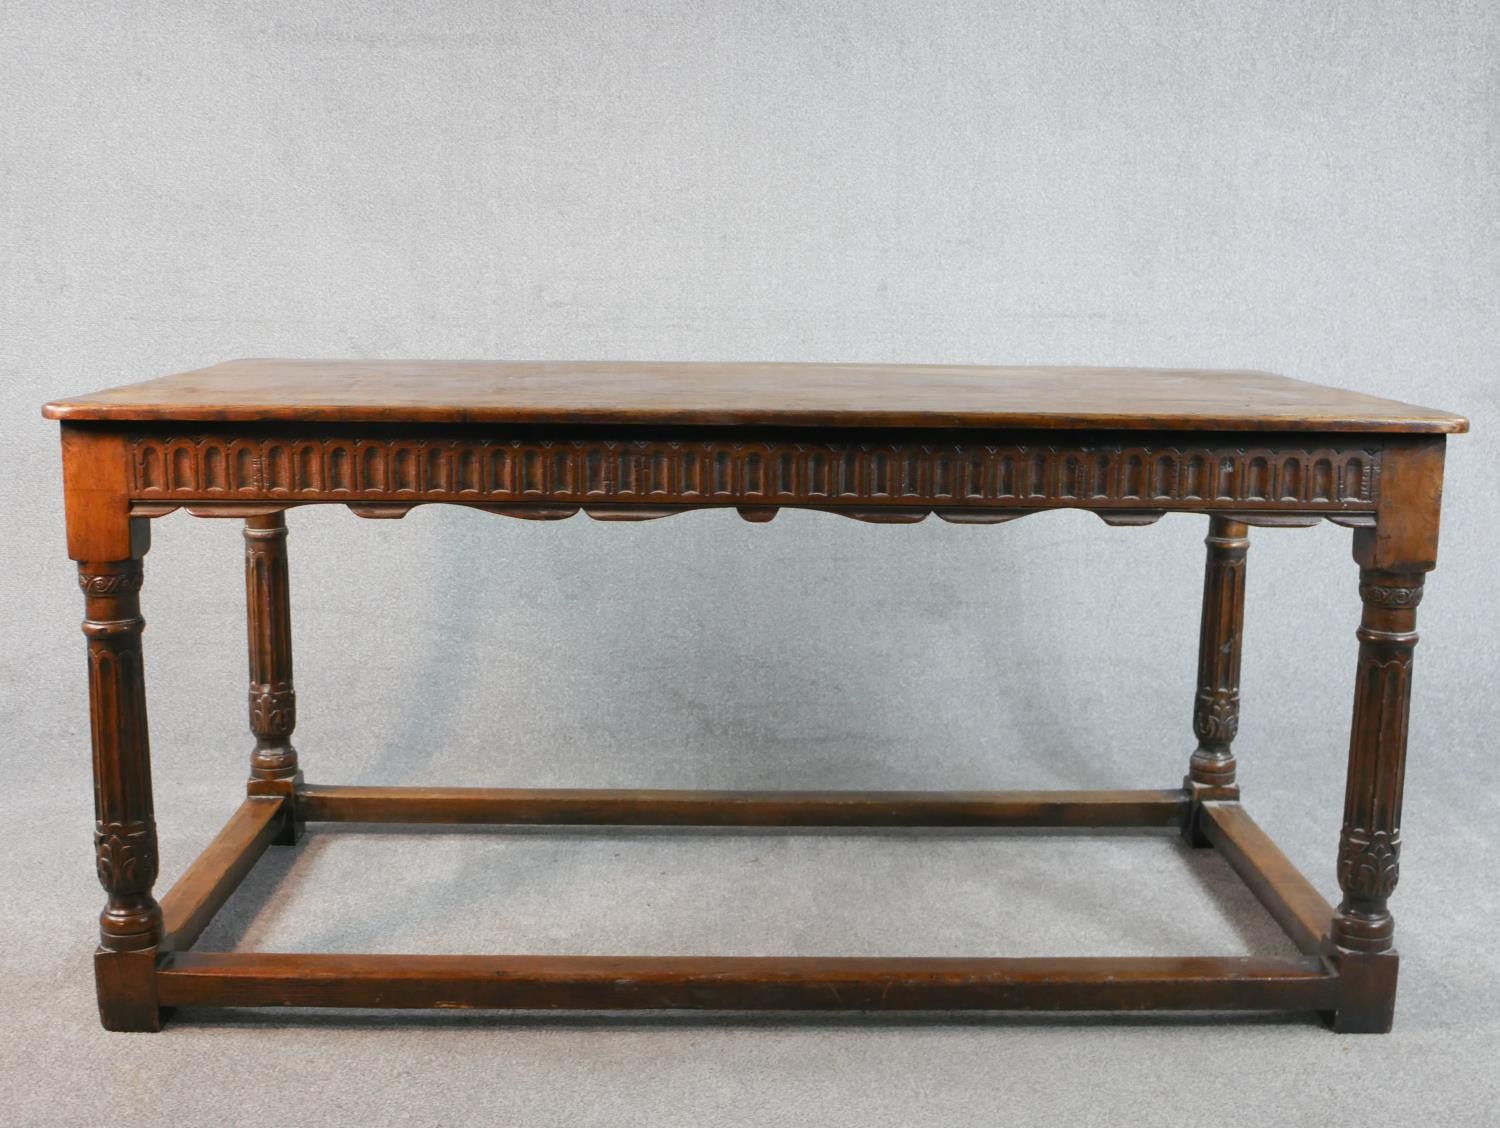 An early 20th century oak refectory dining table, the rectangular top with rounded corners over a